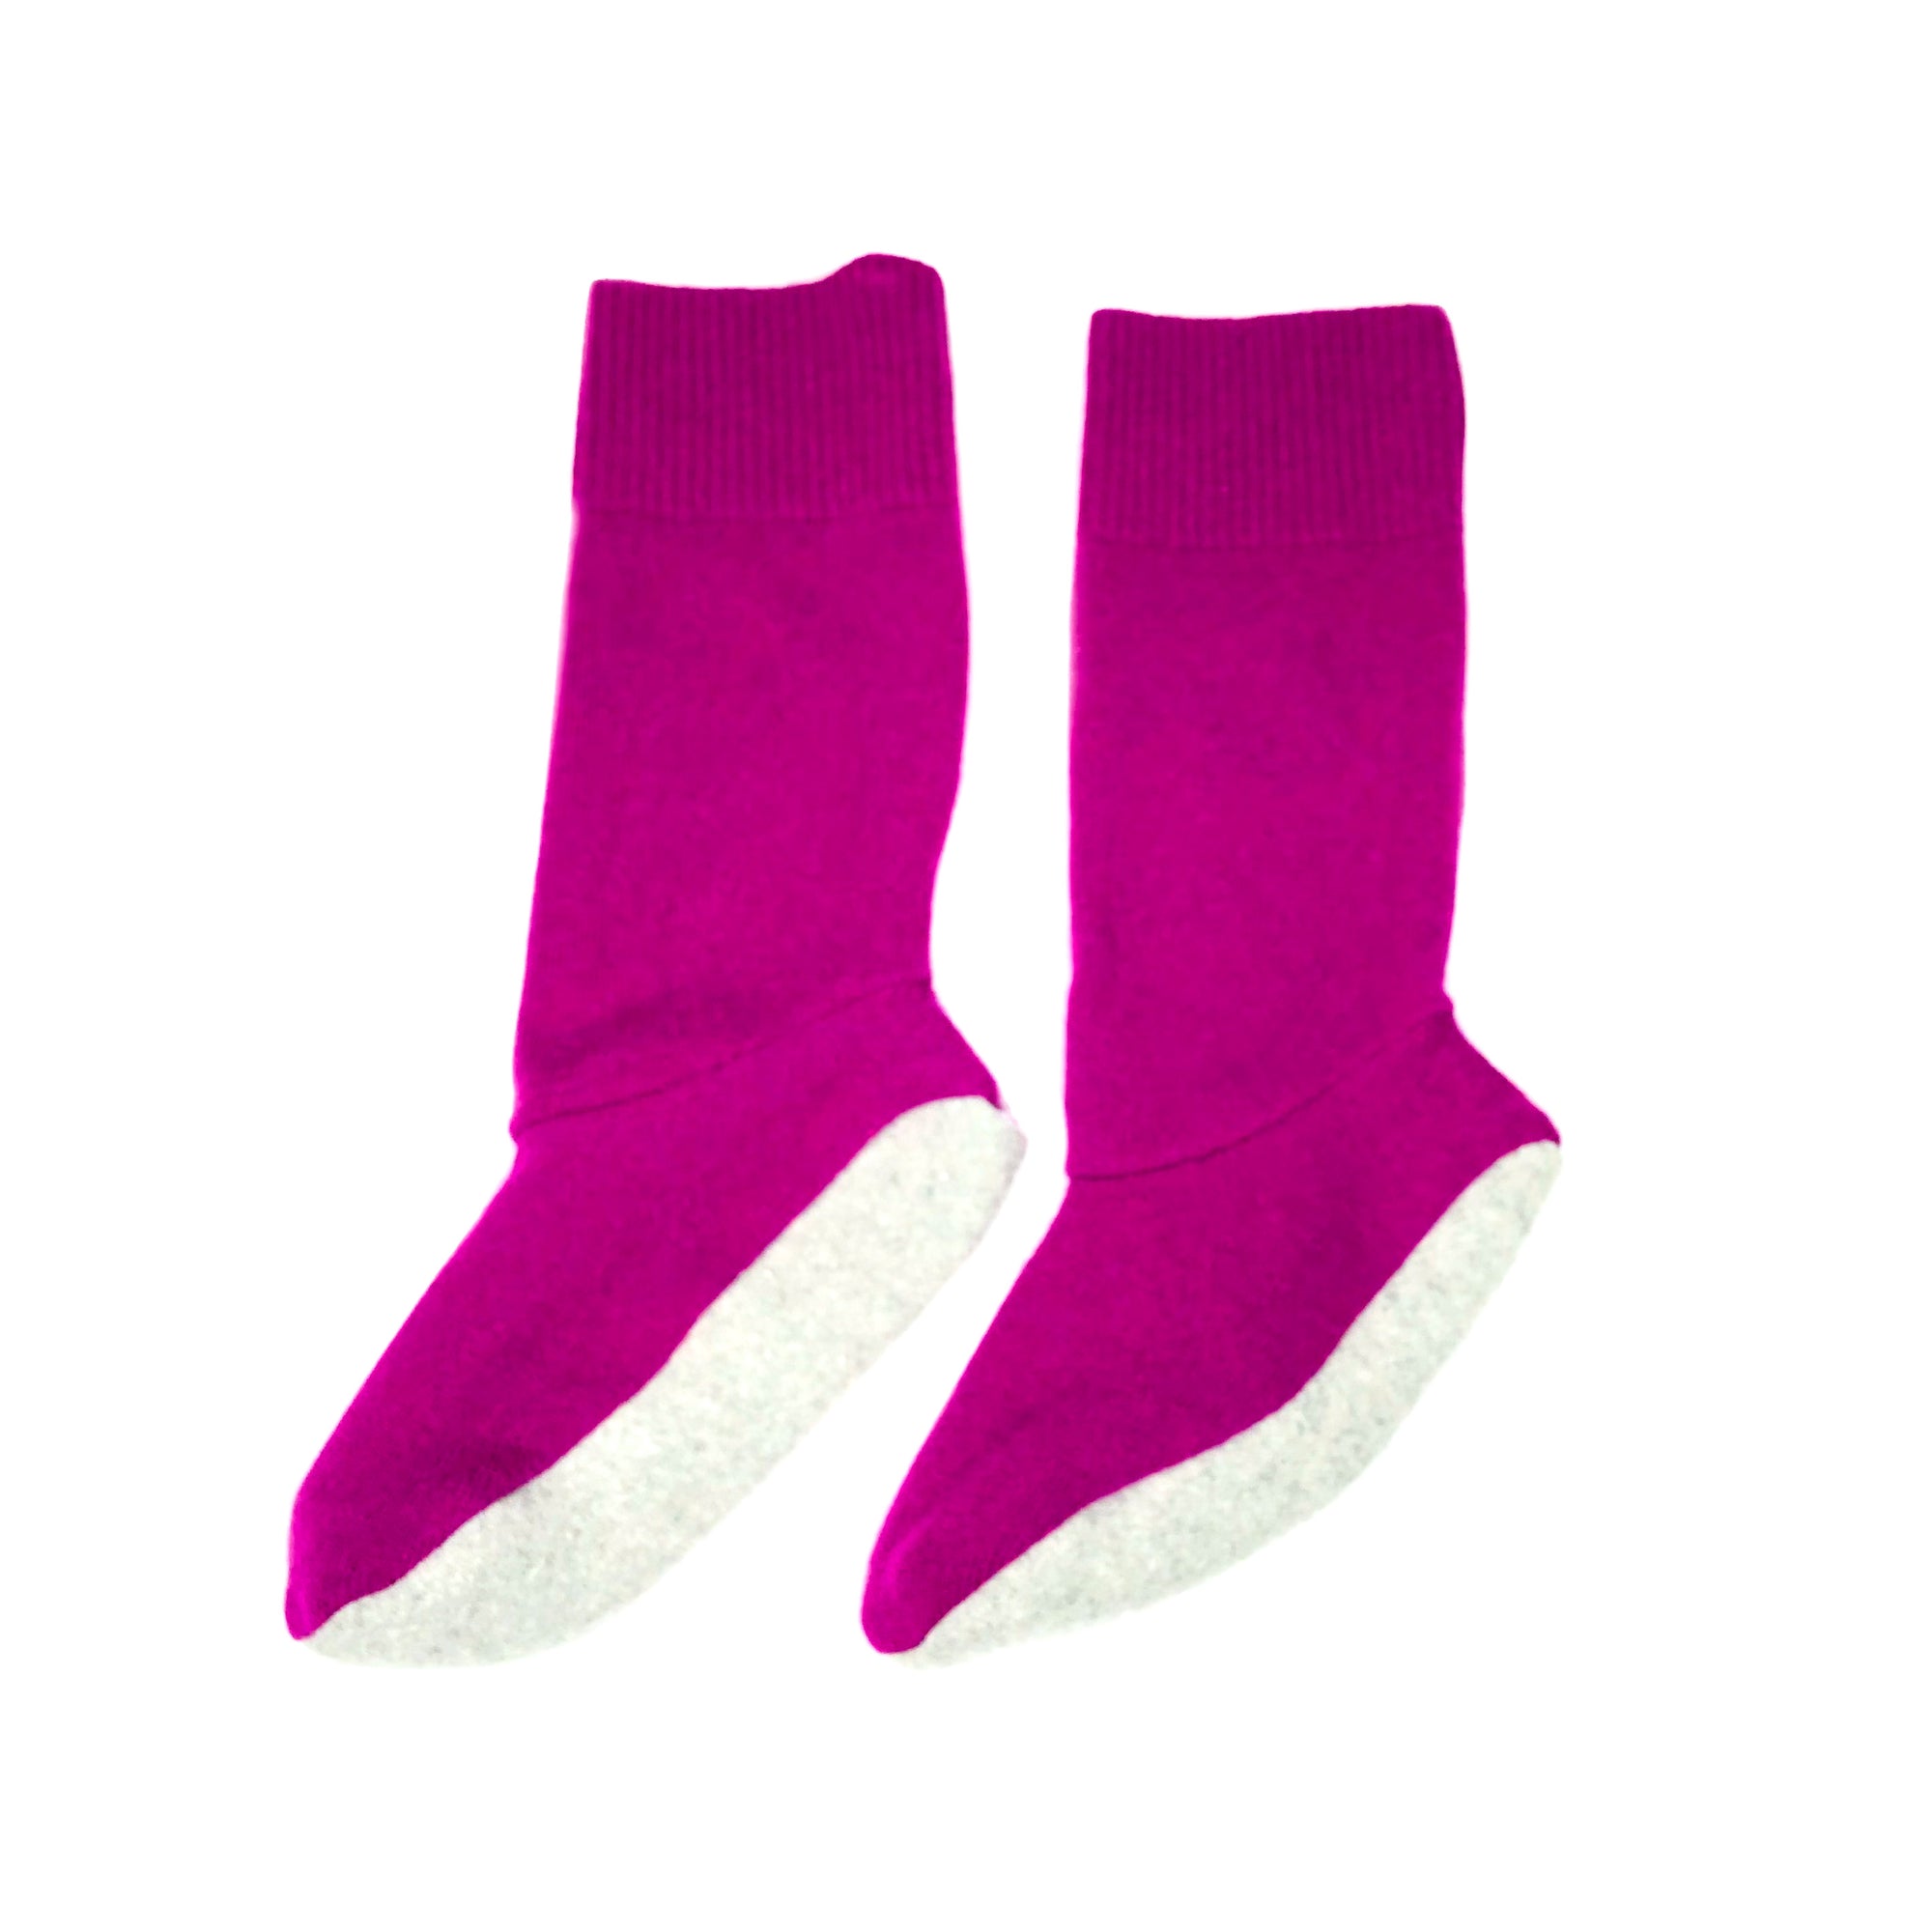 SHORTIES | Cashmere Cabin Socks | Pinky Toes | Size 5-8